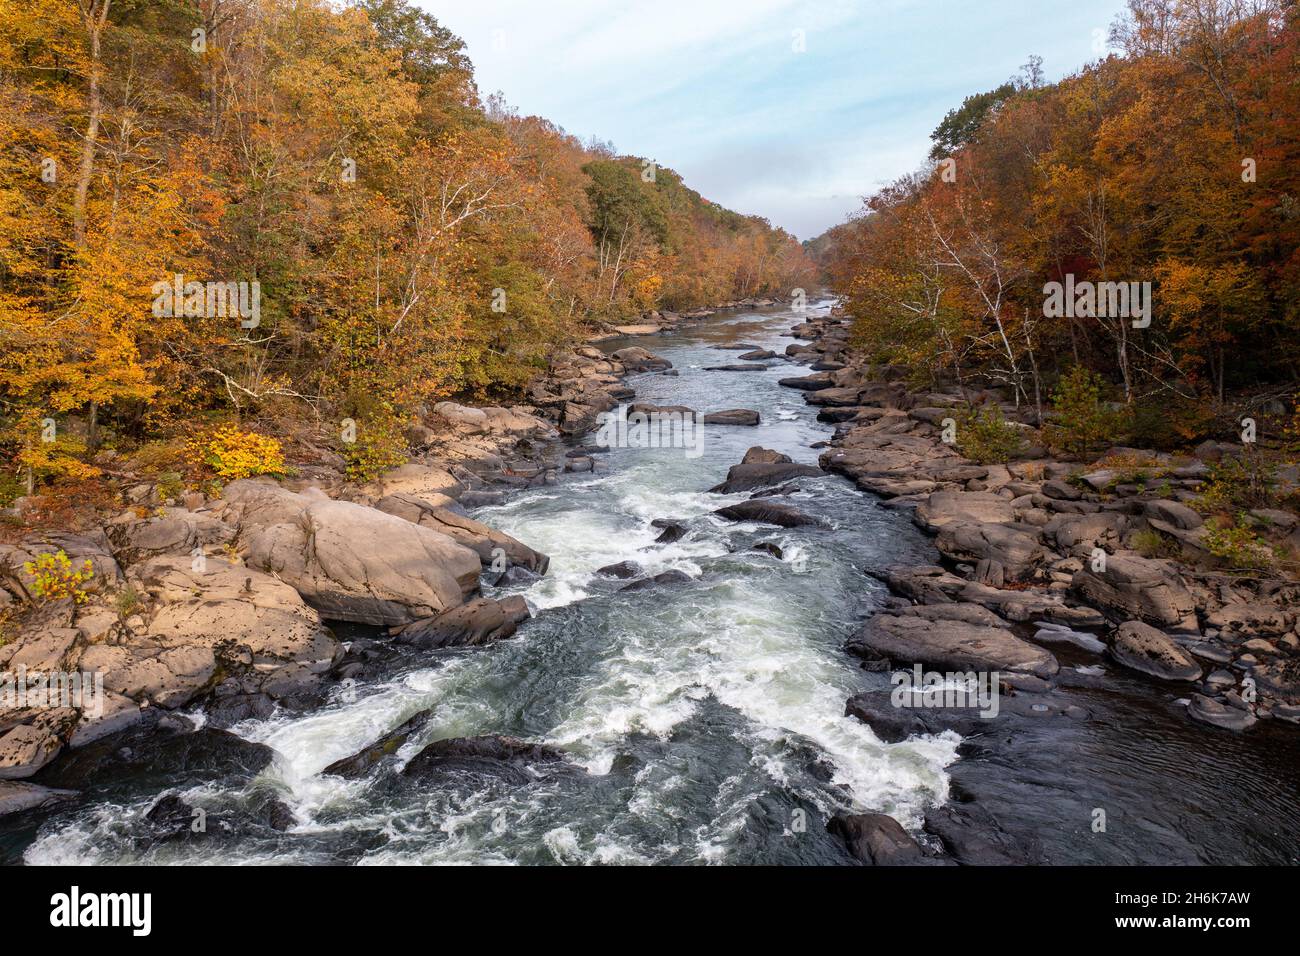 Valley Falls State Park near Fairmont in West Virginia on a colorful misty autumn day with fall colors on the trees Stock Photo